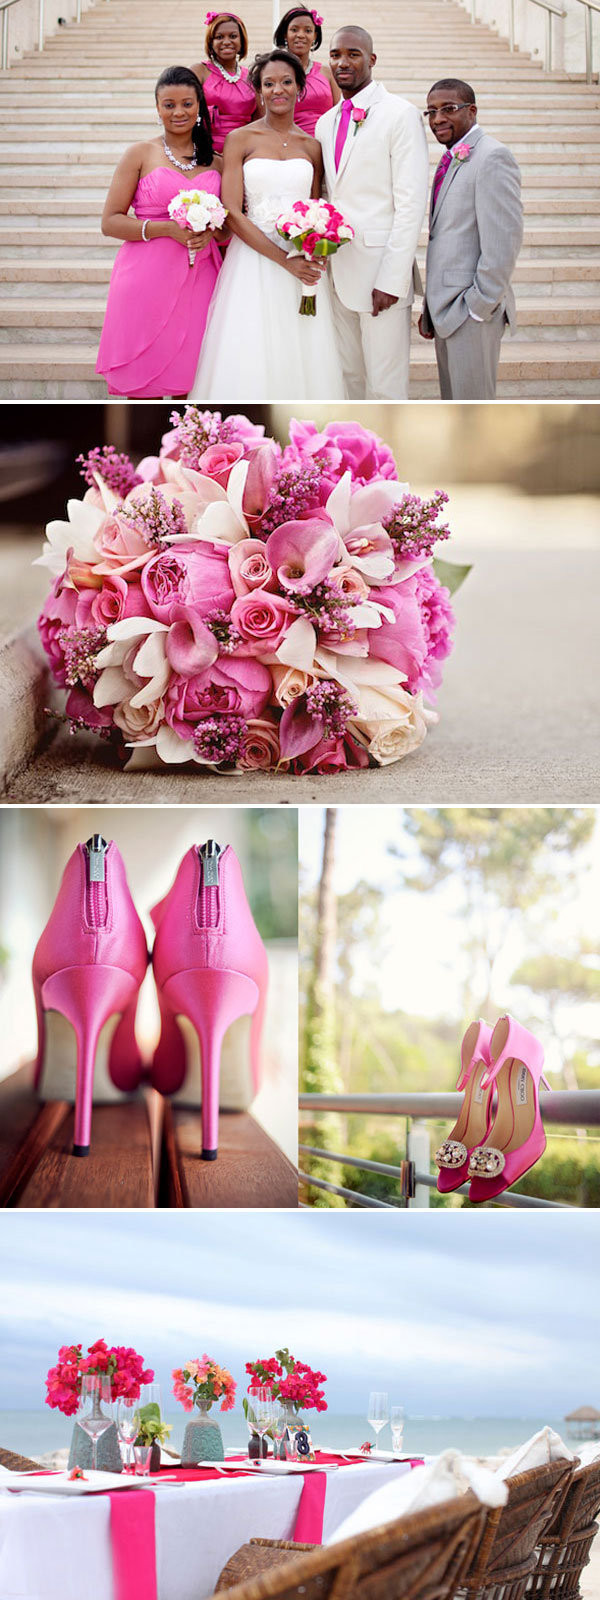 Pink Wedding Decorations
 What Your Wedding Color Says About Your Personality